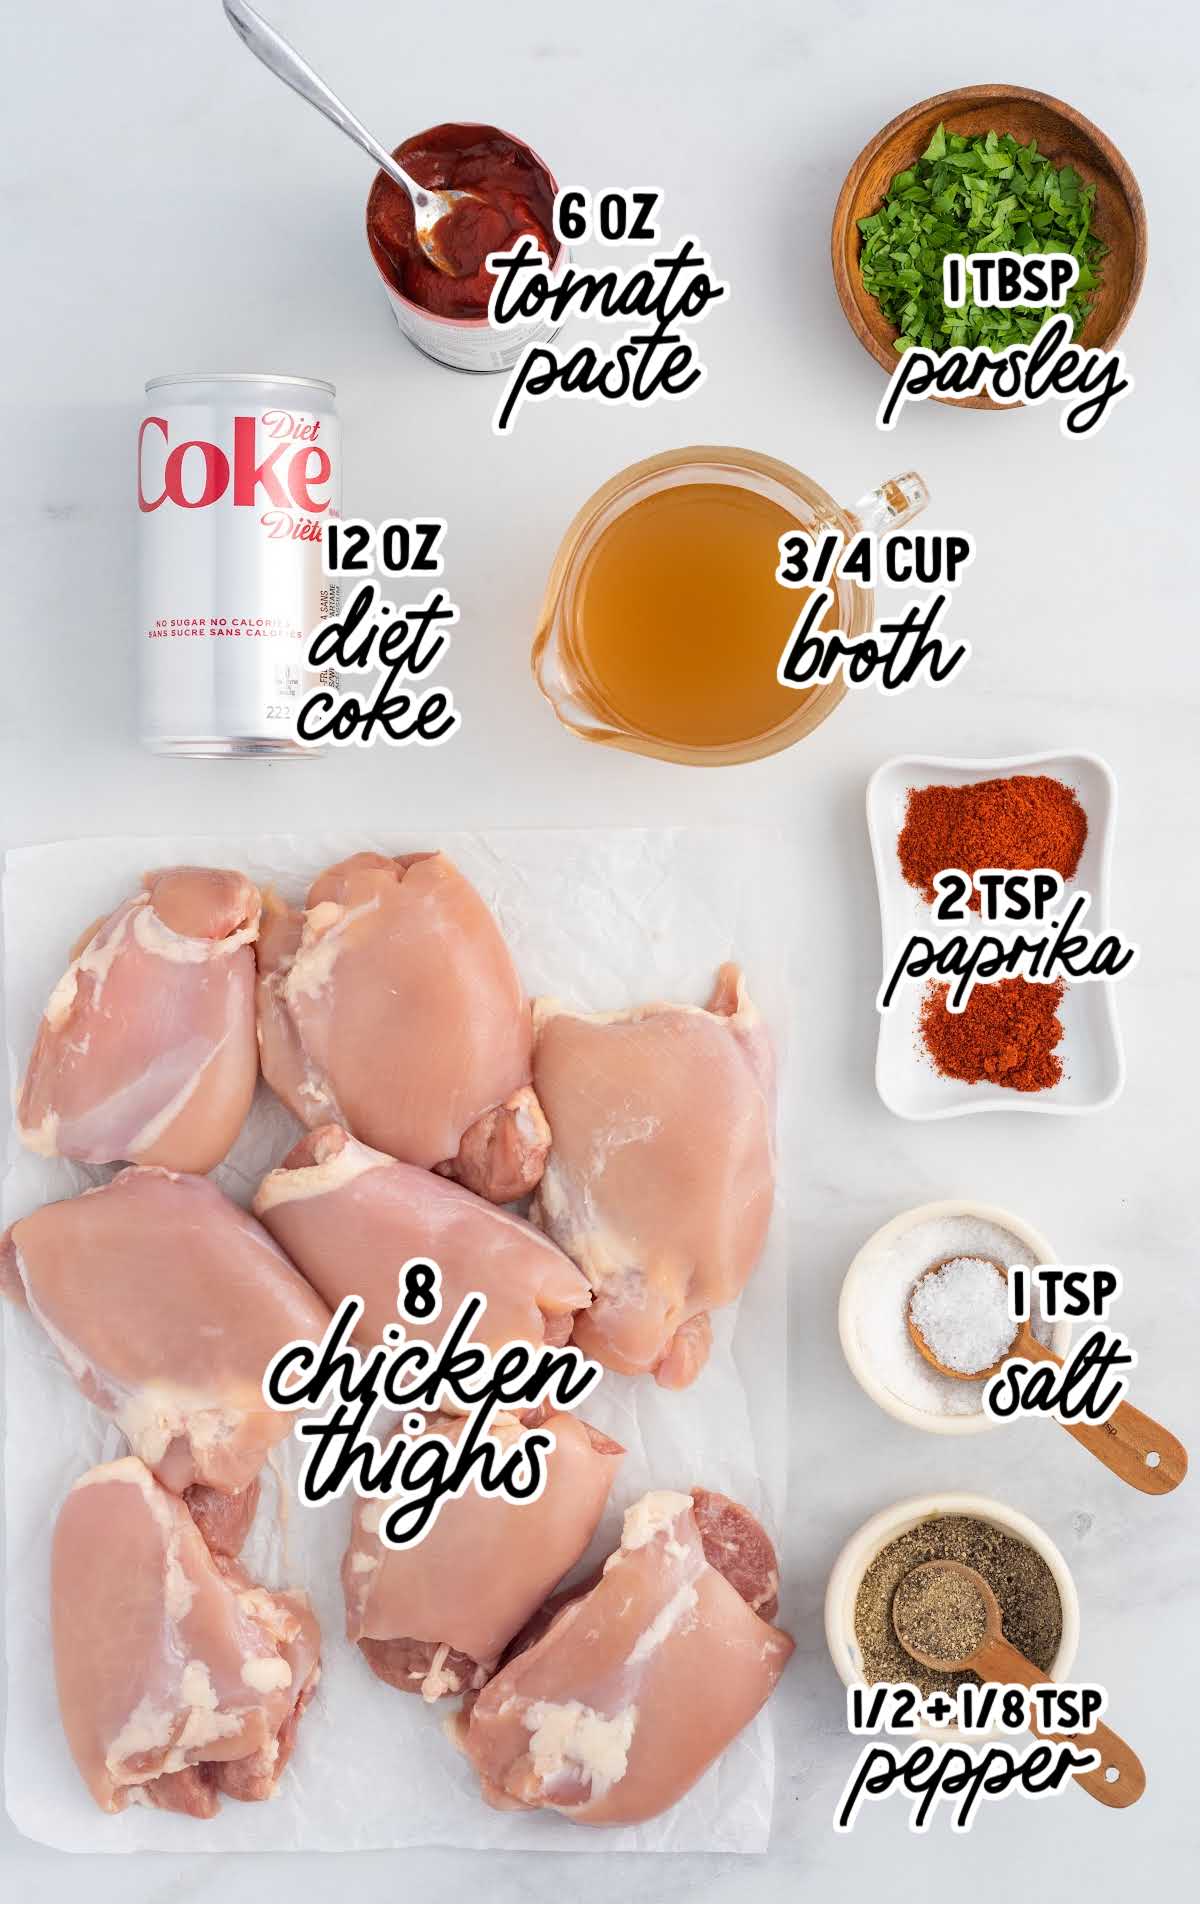 Diet Coke Chicken raw ingredients that are labeled